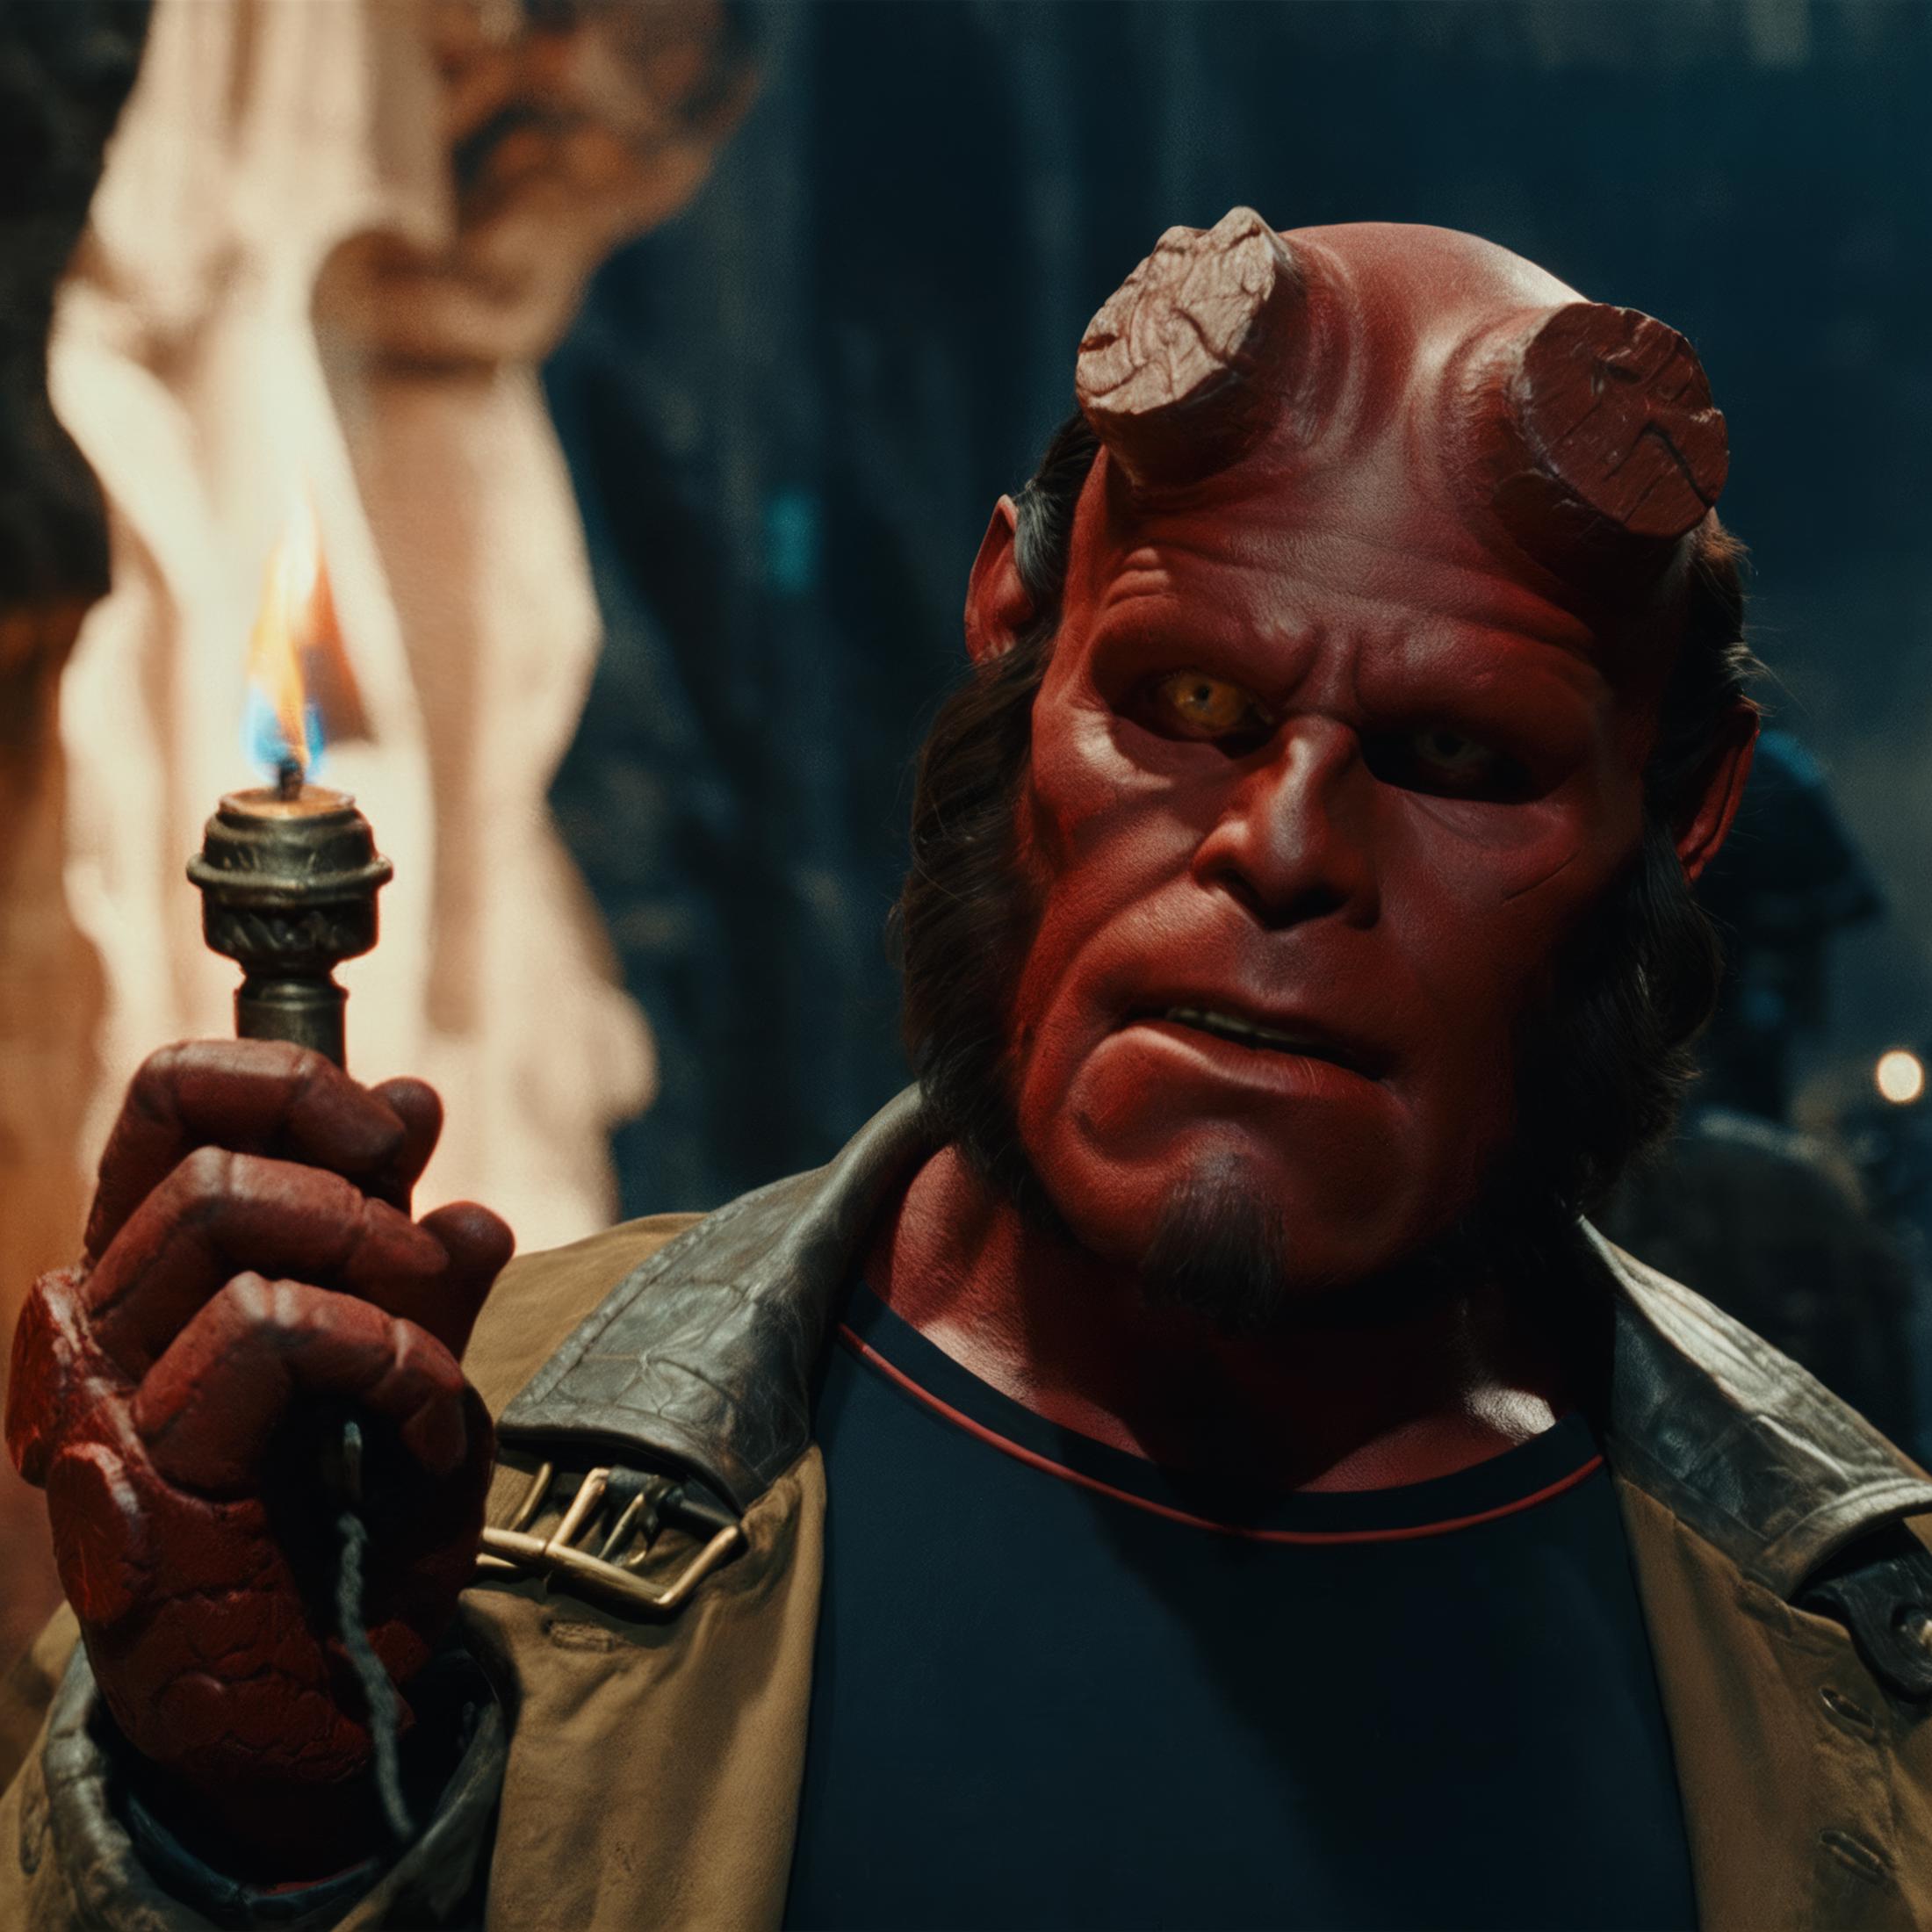 Ron Perlman Hellboy image by thesilvermoth